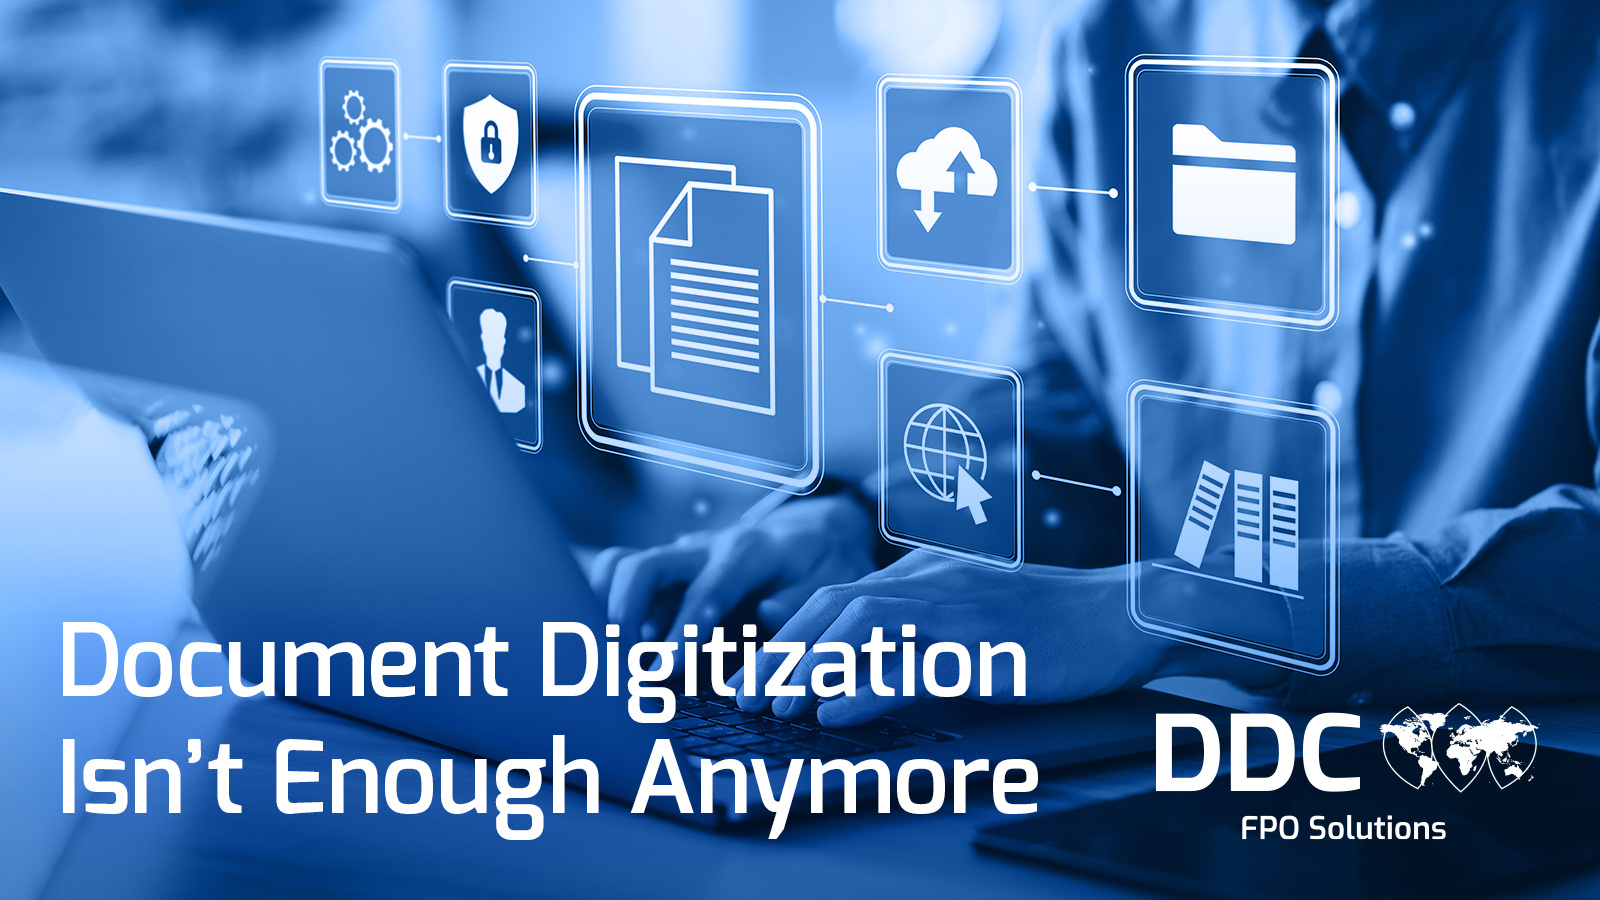 Document Digitization Isn't Enough Anymore